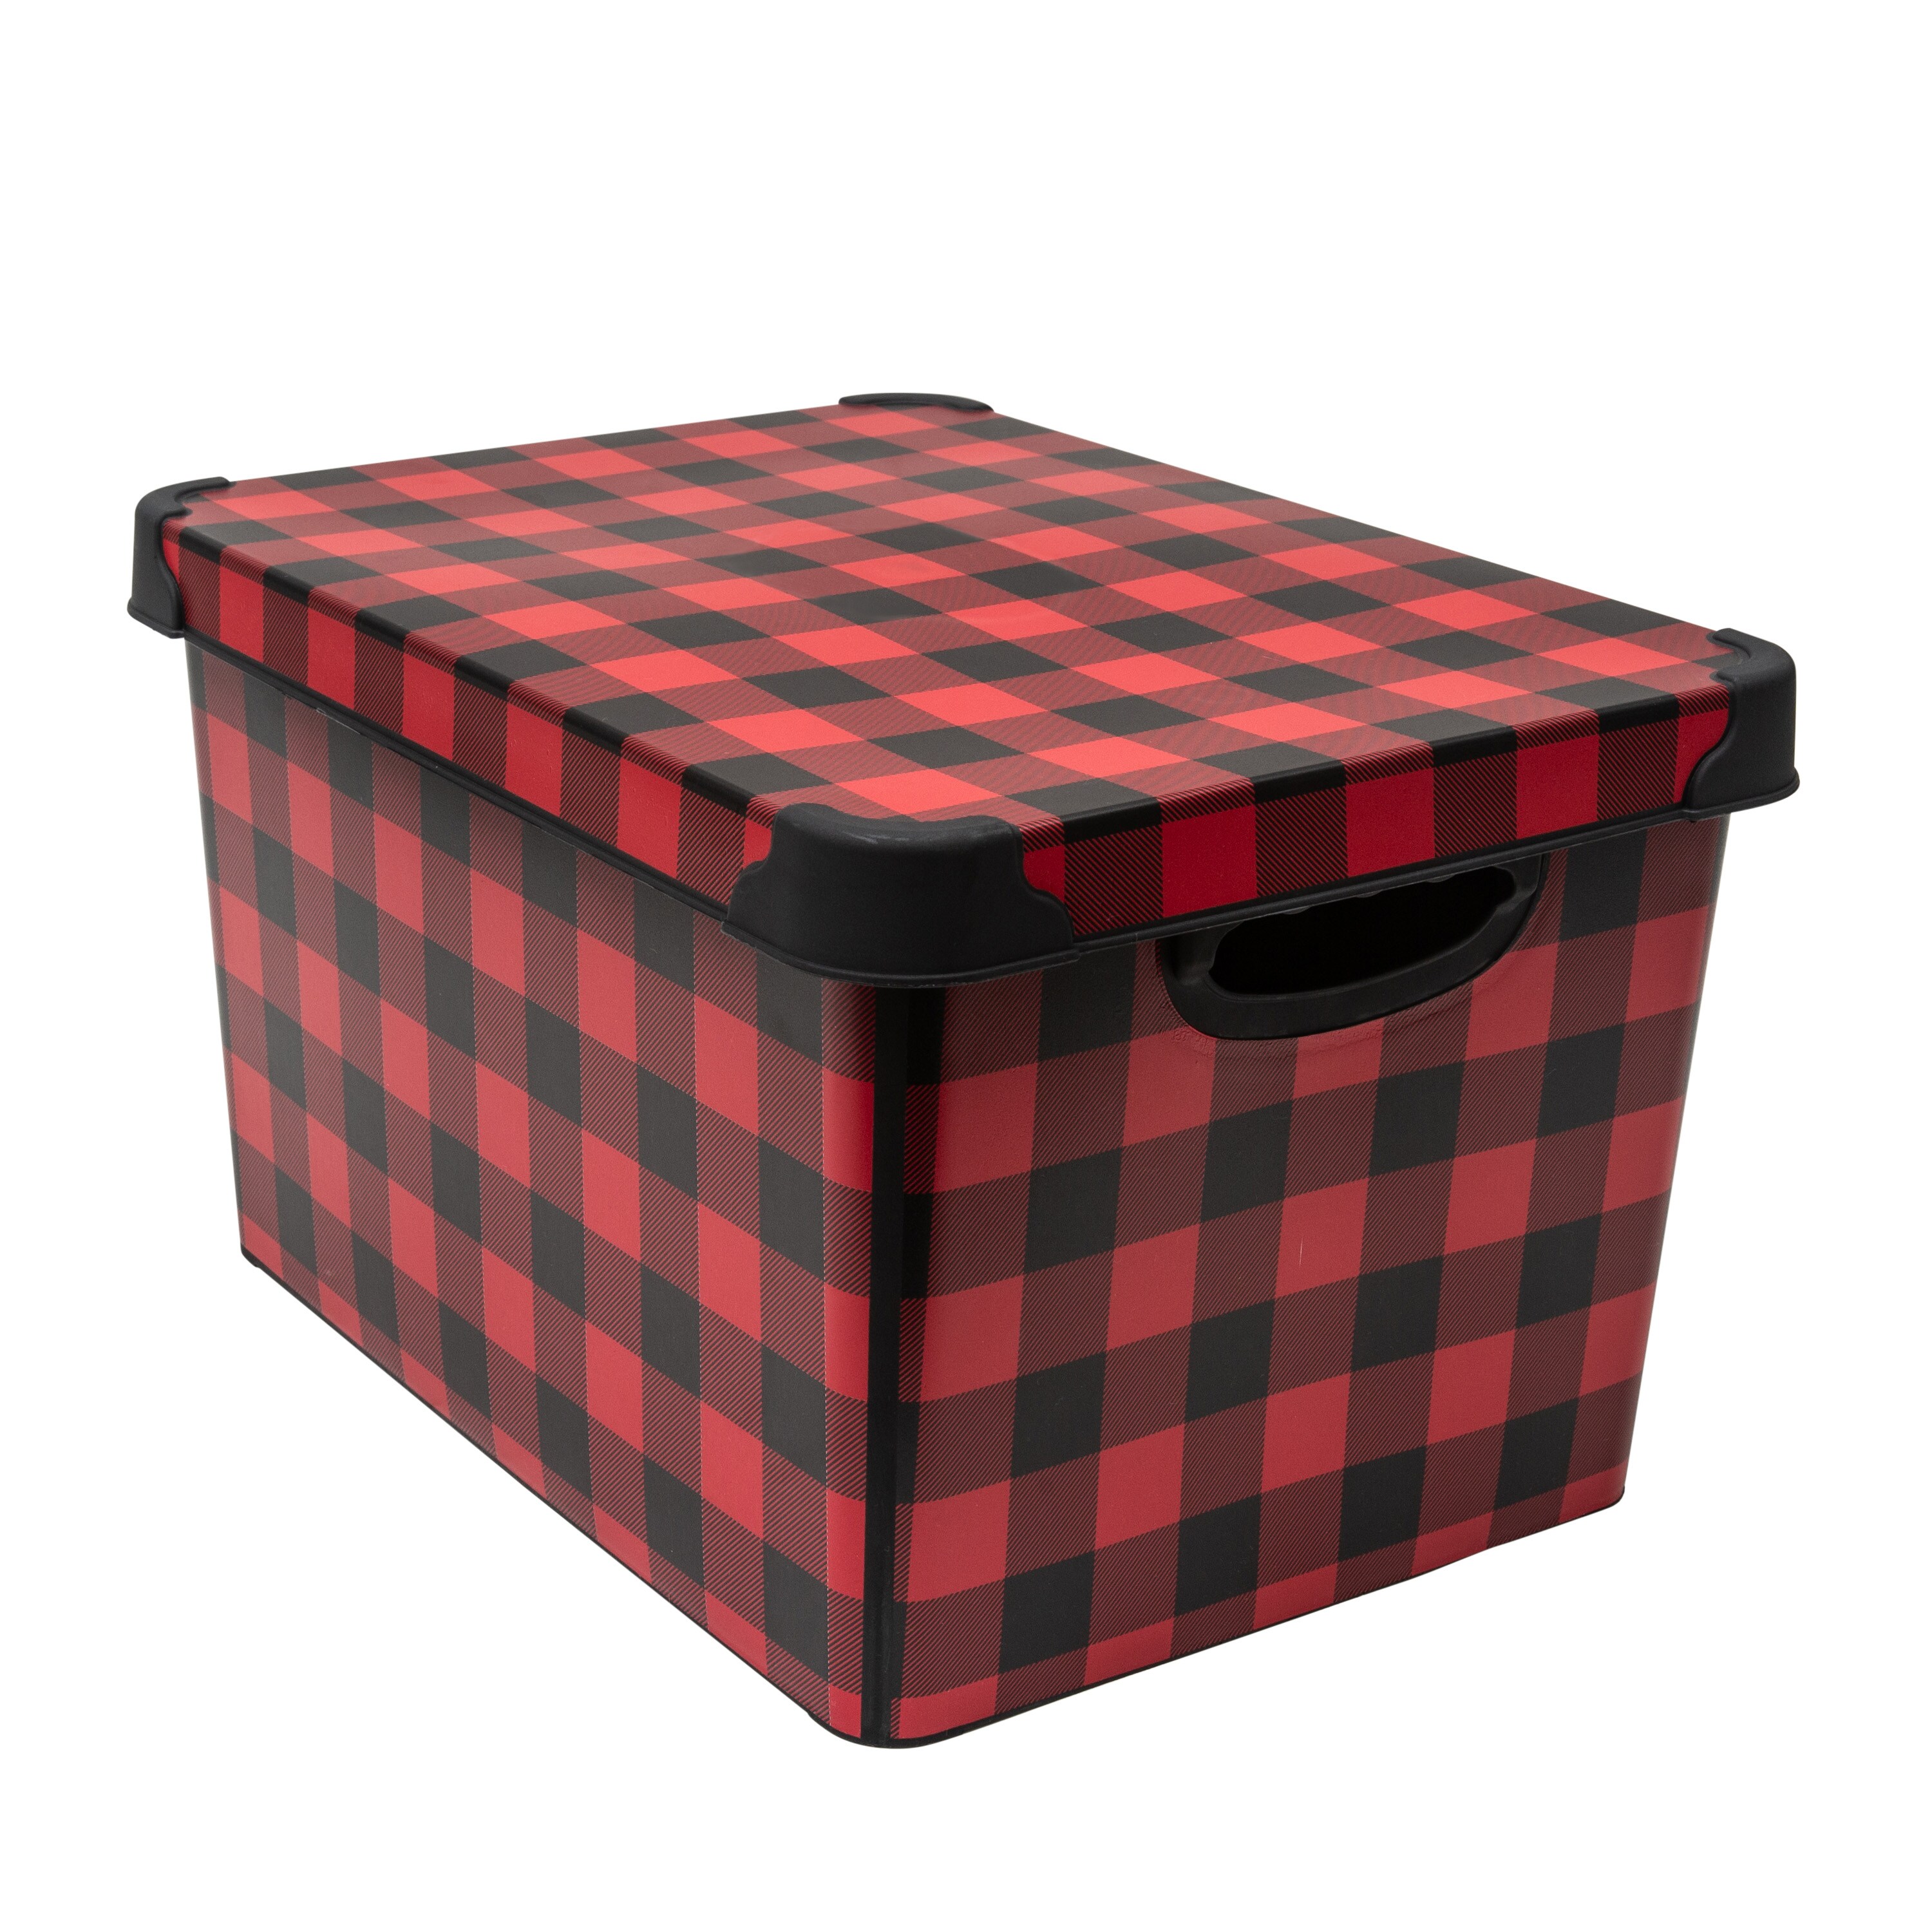  Simplify Small Vinto Storage Box, Click Tight Lid, Dimensions: 9.76 x 6.69 x 4.84, Stackable, Home Organization, 2  Handles